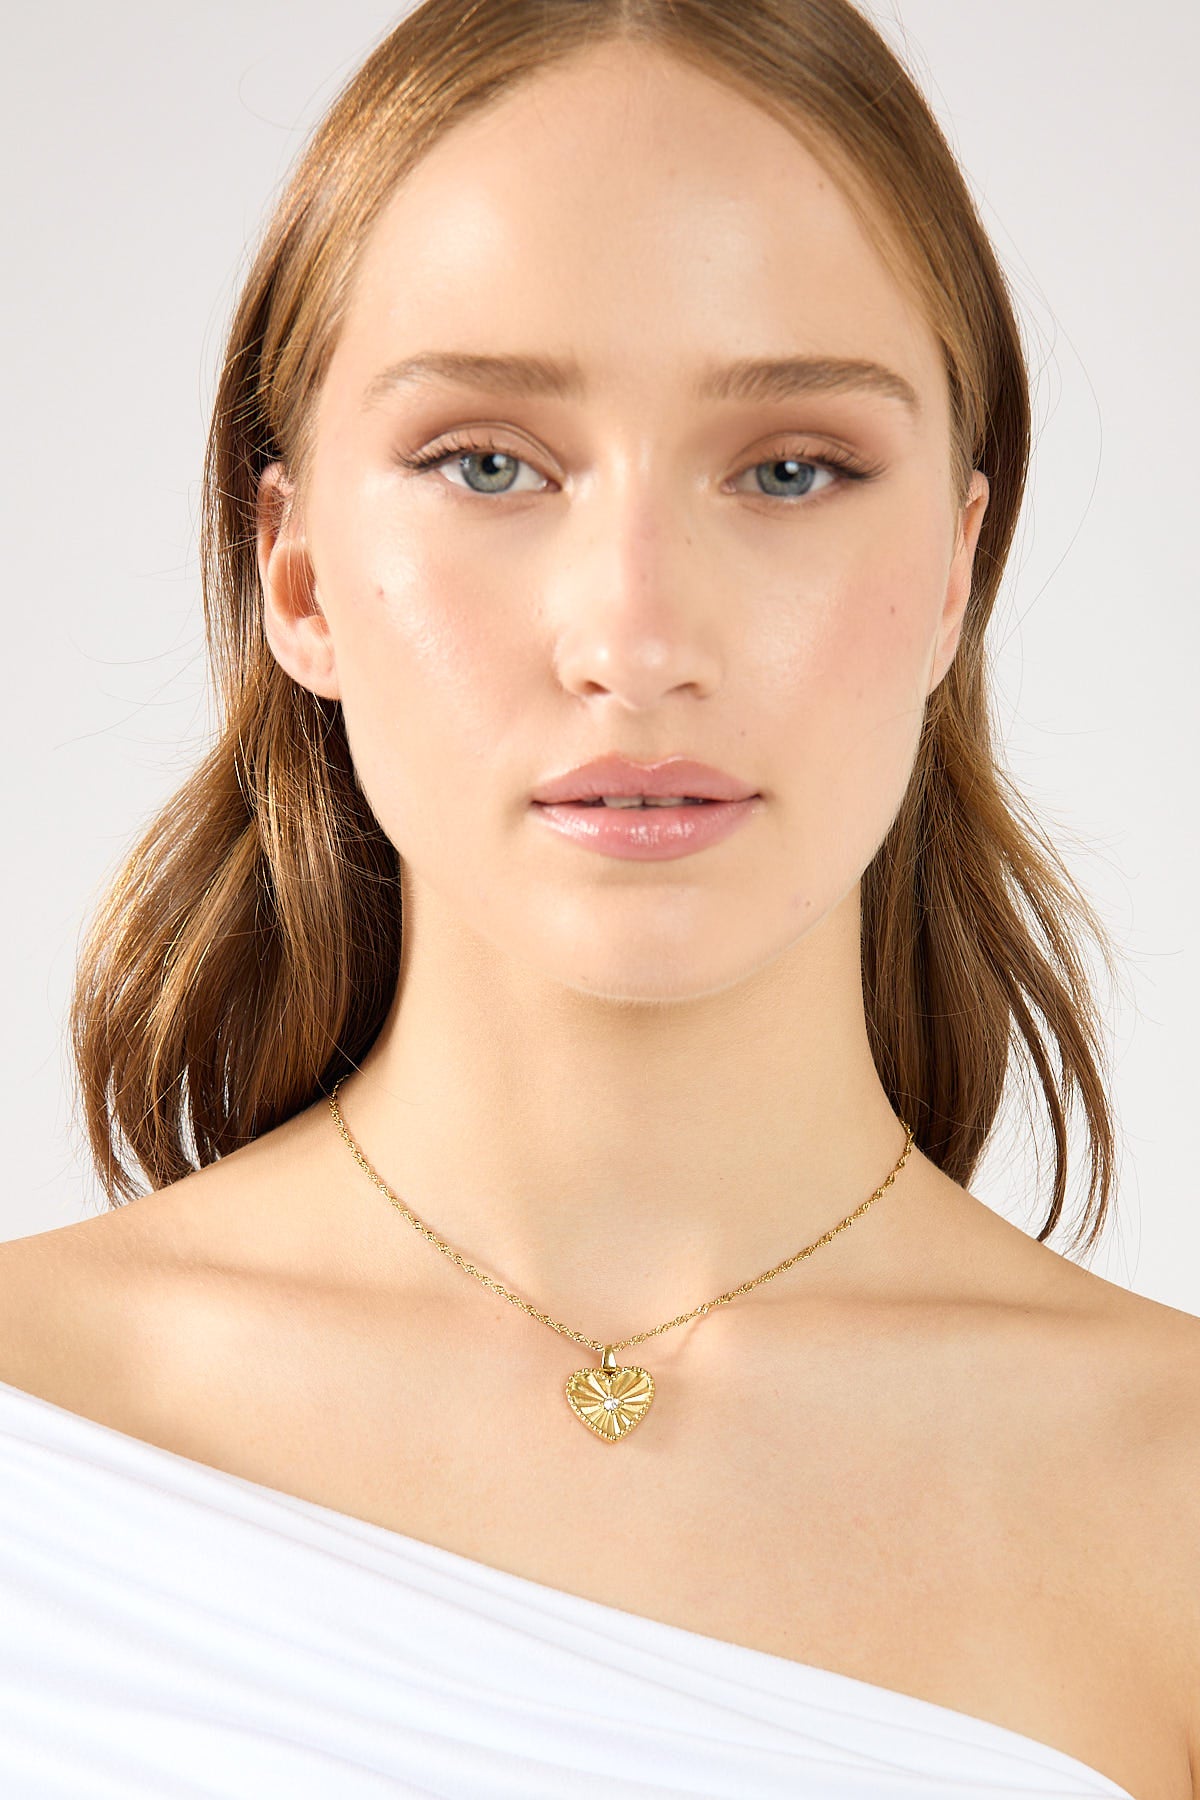 Perfect Stranger Amour Heart Necklace 18k Gold Plated